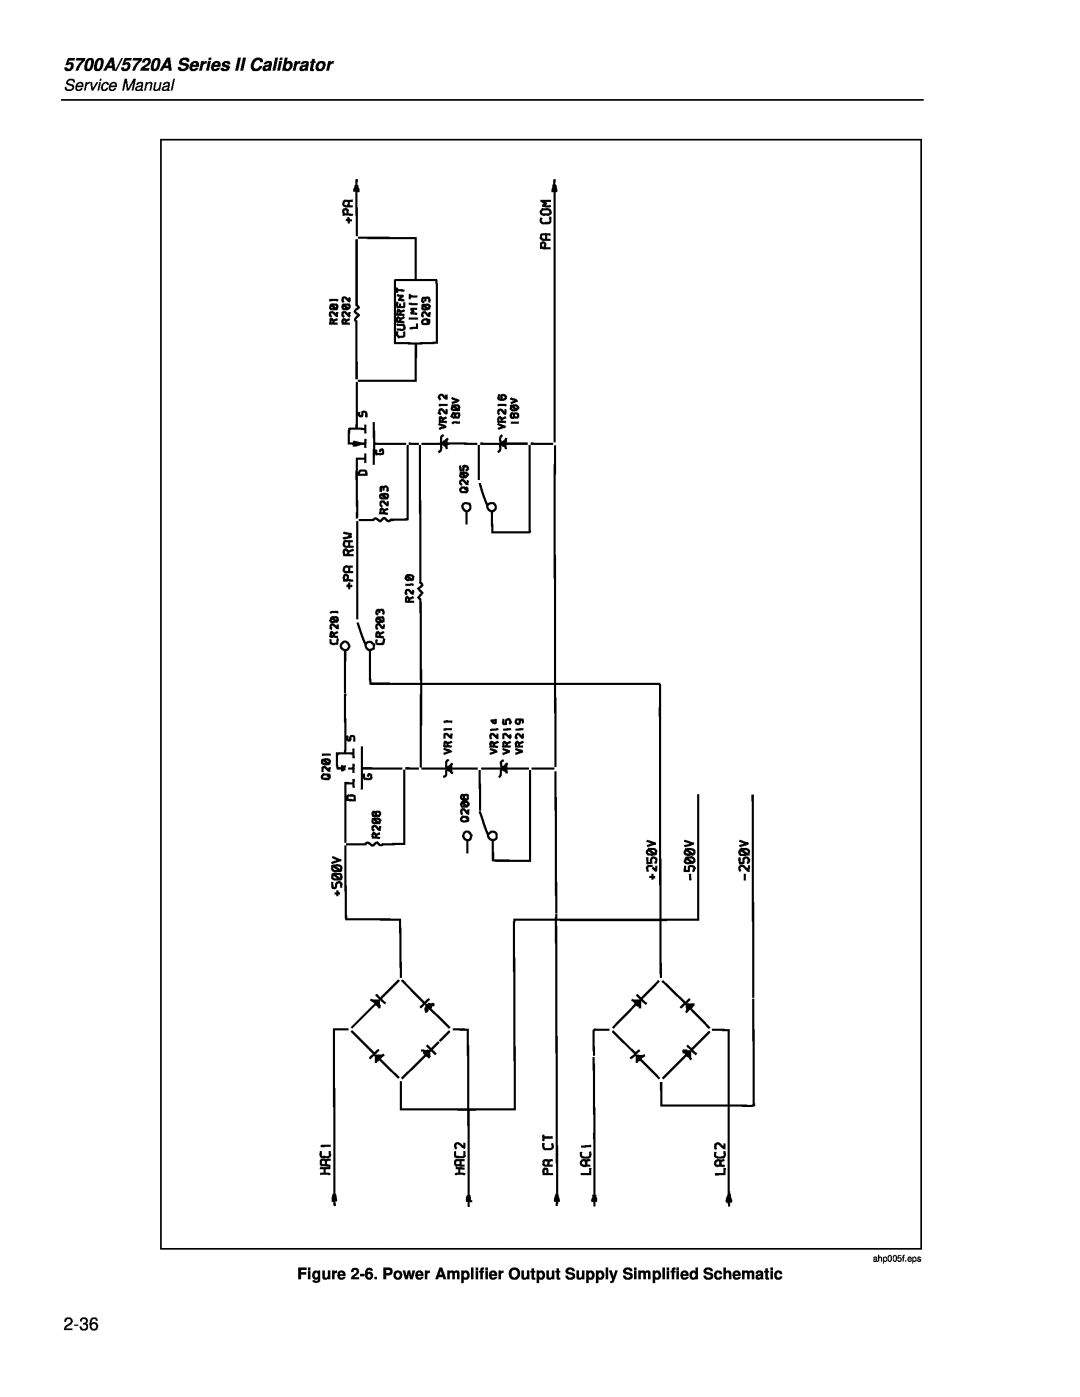 Fluke 5700A/5720A Series II Calibrator, 6. Power Amplifier Output Supply Simplified Schematic, ahp005f.eps 